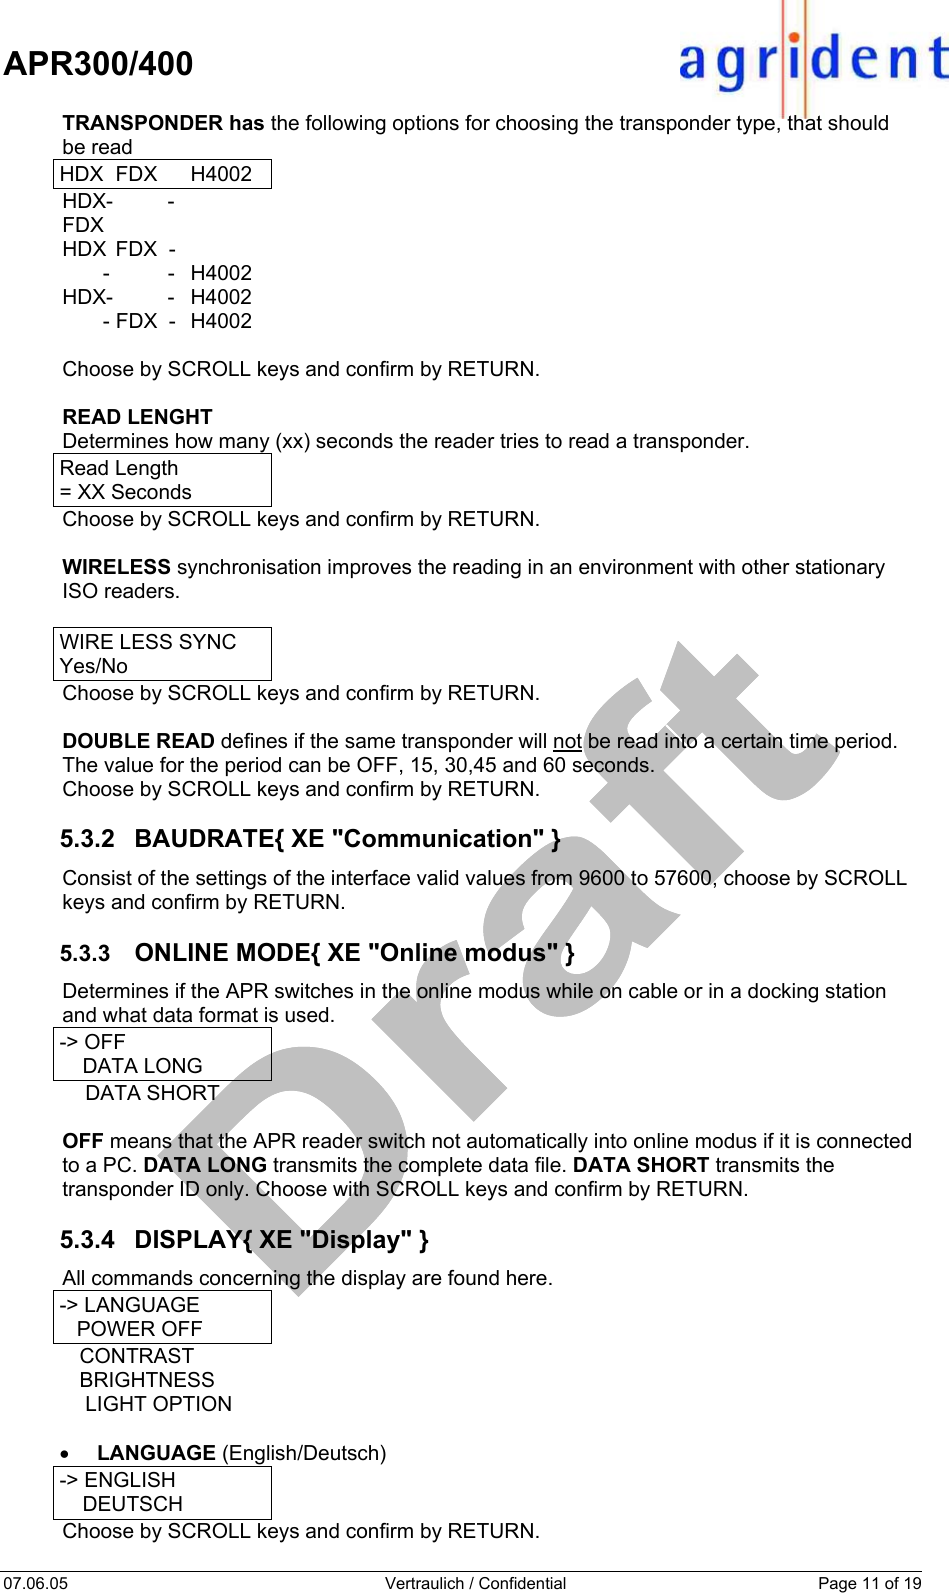    APR300/400  07.06.05  Vertraulich / Confidential  Page 11 of 19  TRANSPONDER has the following options for choosing the transponder type, that should  be read HDX FDX  H4002 HDX-          -   FDX HDX  FDX  -          -          -  H4002 HDX-          -  H4002        - FDX  -  H4002  Choose by SCROLL keys and confirm by RETURN.  READ LENGHT  Determines how many (xx) seconds the reader tries to read a transponder. Read Length   = XX Seconds Choose by SCROLL keys and confirm by RETURN.  WIRELESS synchronisation improves the reading in an environment with other stationary ISO readers.  WIRE LESS SYNC Yes/No Choose by SCROLL keys and confirm by RETURN.  DOUBLE READ defines if the same transponder will not be read into a certain time period. The value for the period can be OFF, 15, 30,45 and 60 seconds. Choose by SCROLL keys and confirm by RETURN.  5.3.2  BAUDRATE{ XE &quot;Communication&quot; } Consist of the settings of the interface valid values from 9600 to 57600, choose by SCROLL keys and confirm by RETURN.  5.3.3  ONLINE MODE{ XE &quot;Online modus&quot; } Determines if the APR switches in the online modus while on cable or in a docking station and what data format is used. -&gt; OFF     DATA LONG     DATA SHORT  OFF means that the APR reader switch not automatically into online modus if it is connected to a PC. DATA LONG transmits the complete data file. DATA SHORT transmits the transponder ID only. Choose with SCROLL keys and confirm by RETURN.  5.3.4 DISPLAY{ XE &quot;Display&quot; } All commands concerning the display are found here. -&gt; LANGUAGE    POWER OFF    CONTRAST    BRIGHTNESS     LIGHT OPTION  •  LANGUAGE (English/Deutsch) -&gt; ENGLISH     DEUTSCH Choose by SCROLL keys and confirm by RETURN.  